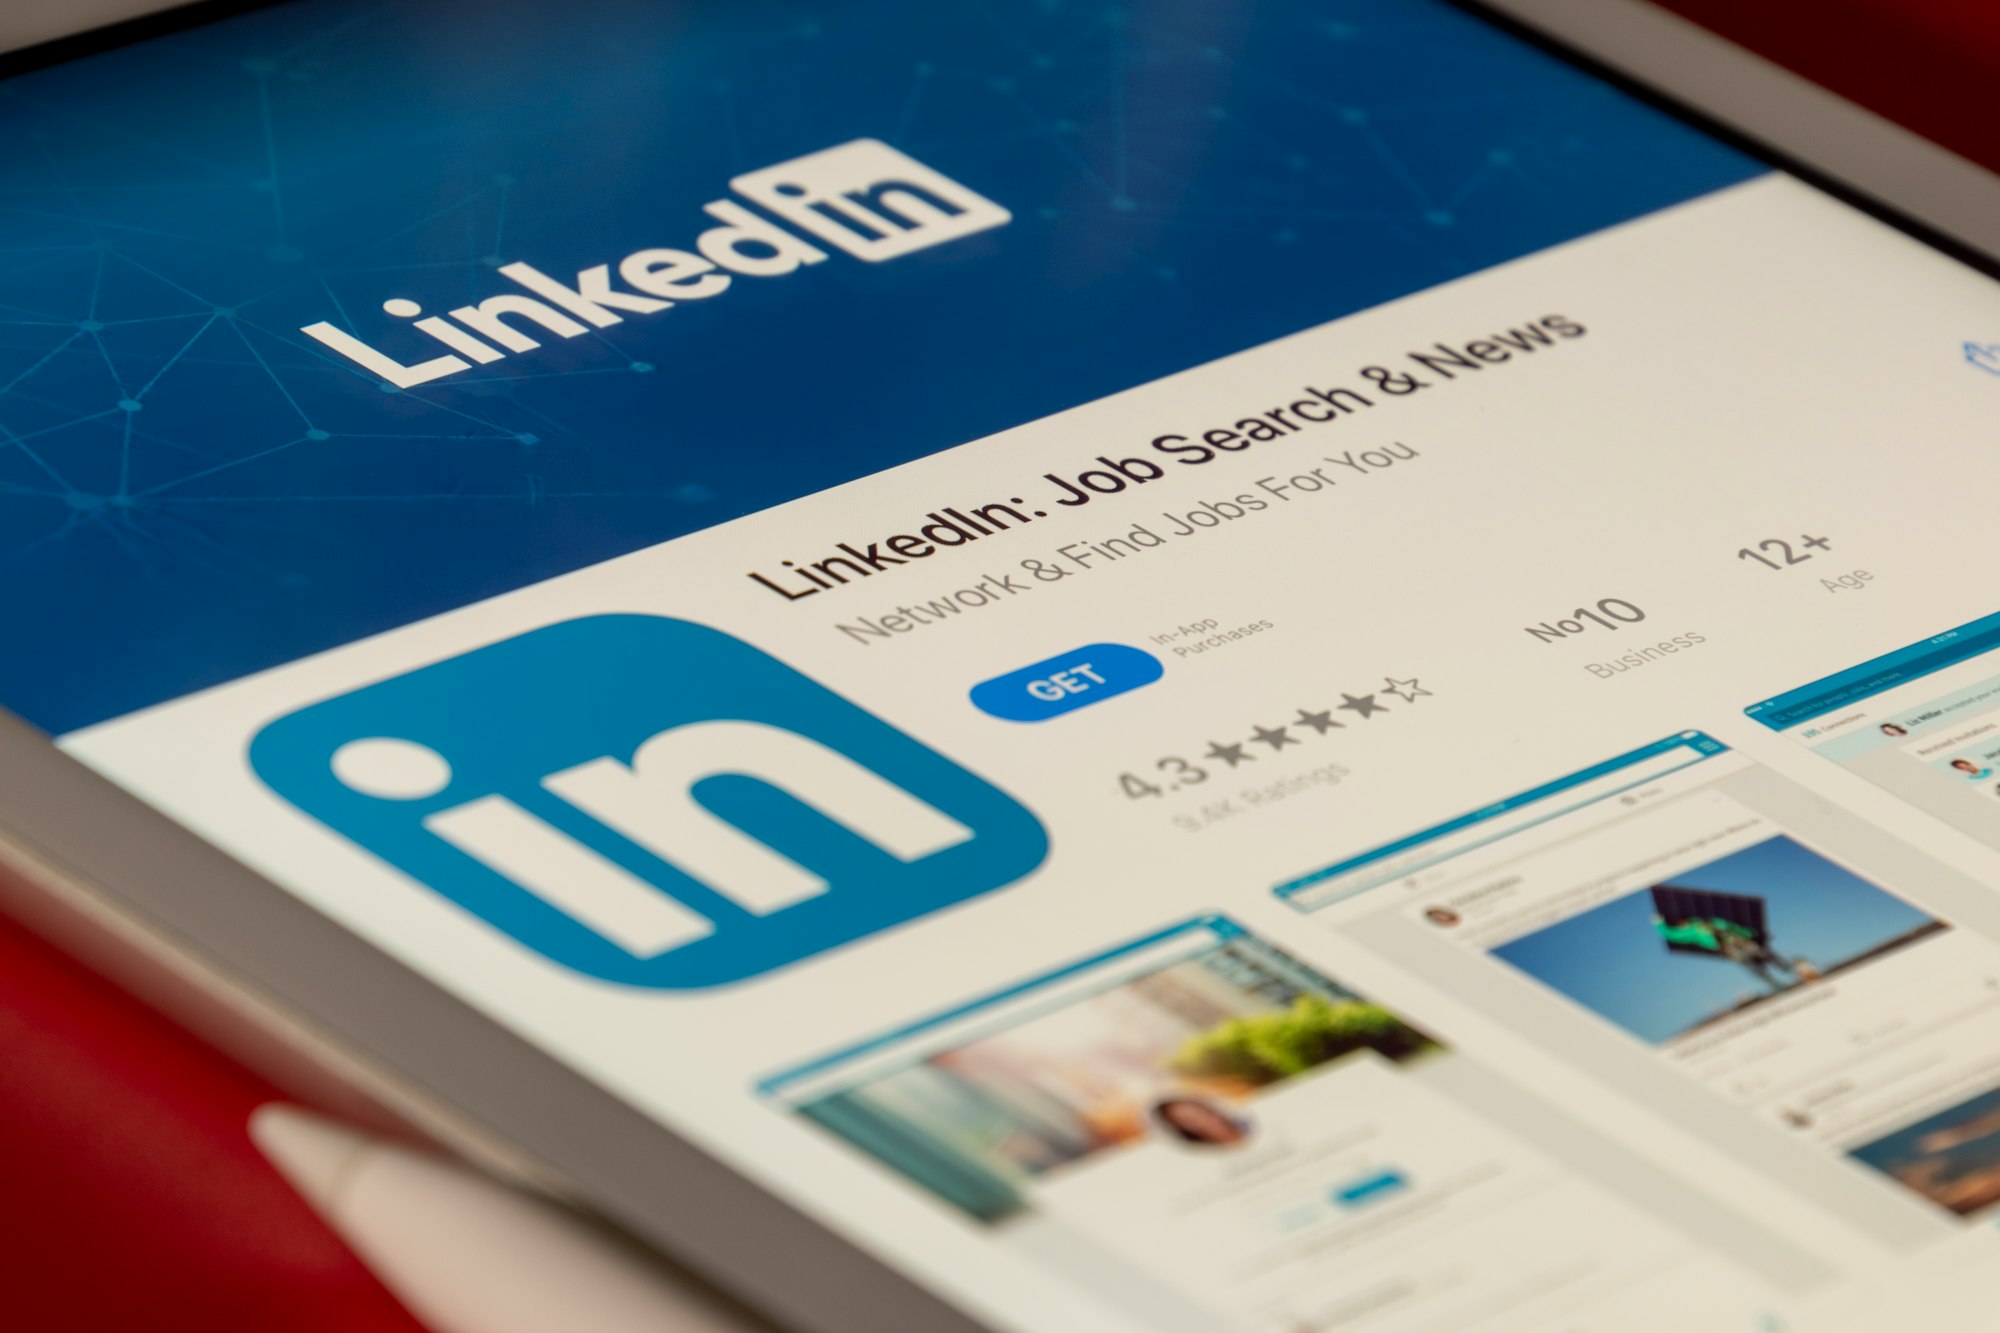 LinkedIn launches personalized writing suggestions with new GPT-powered tools